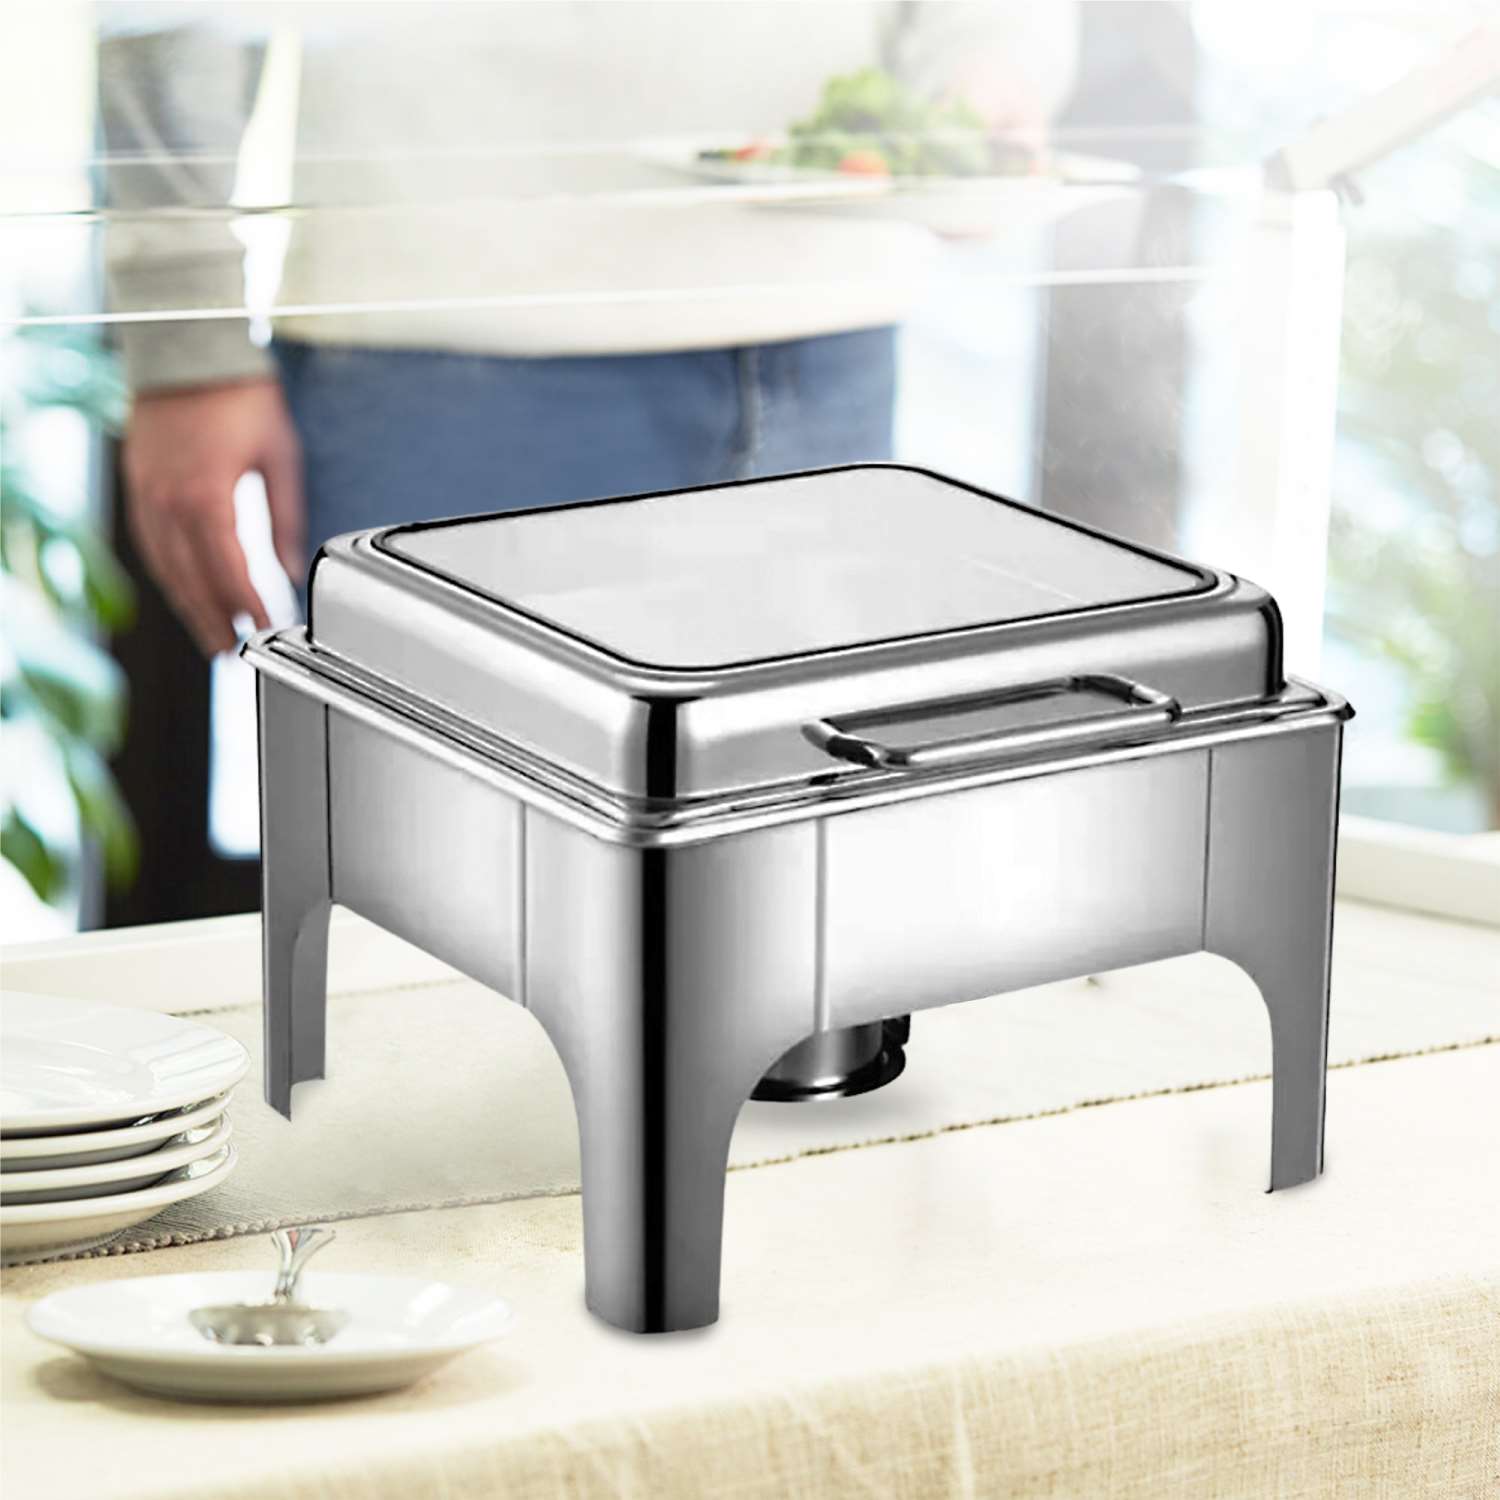 Chefset Stainless Steel Hydraulic Square-steel-6 Liter